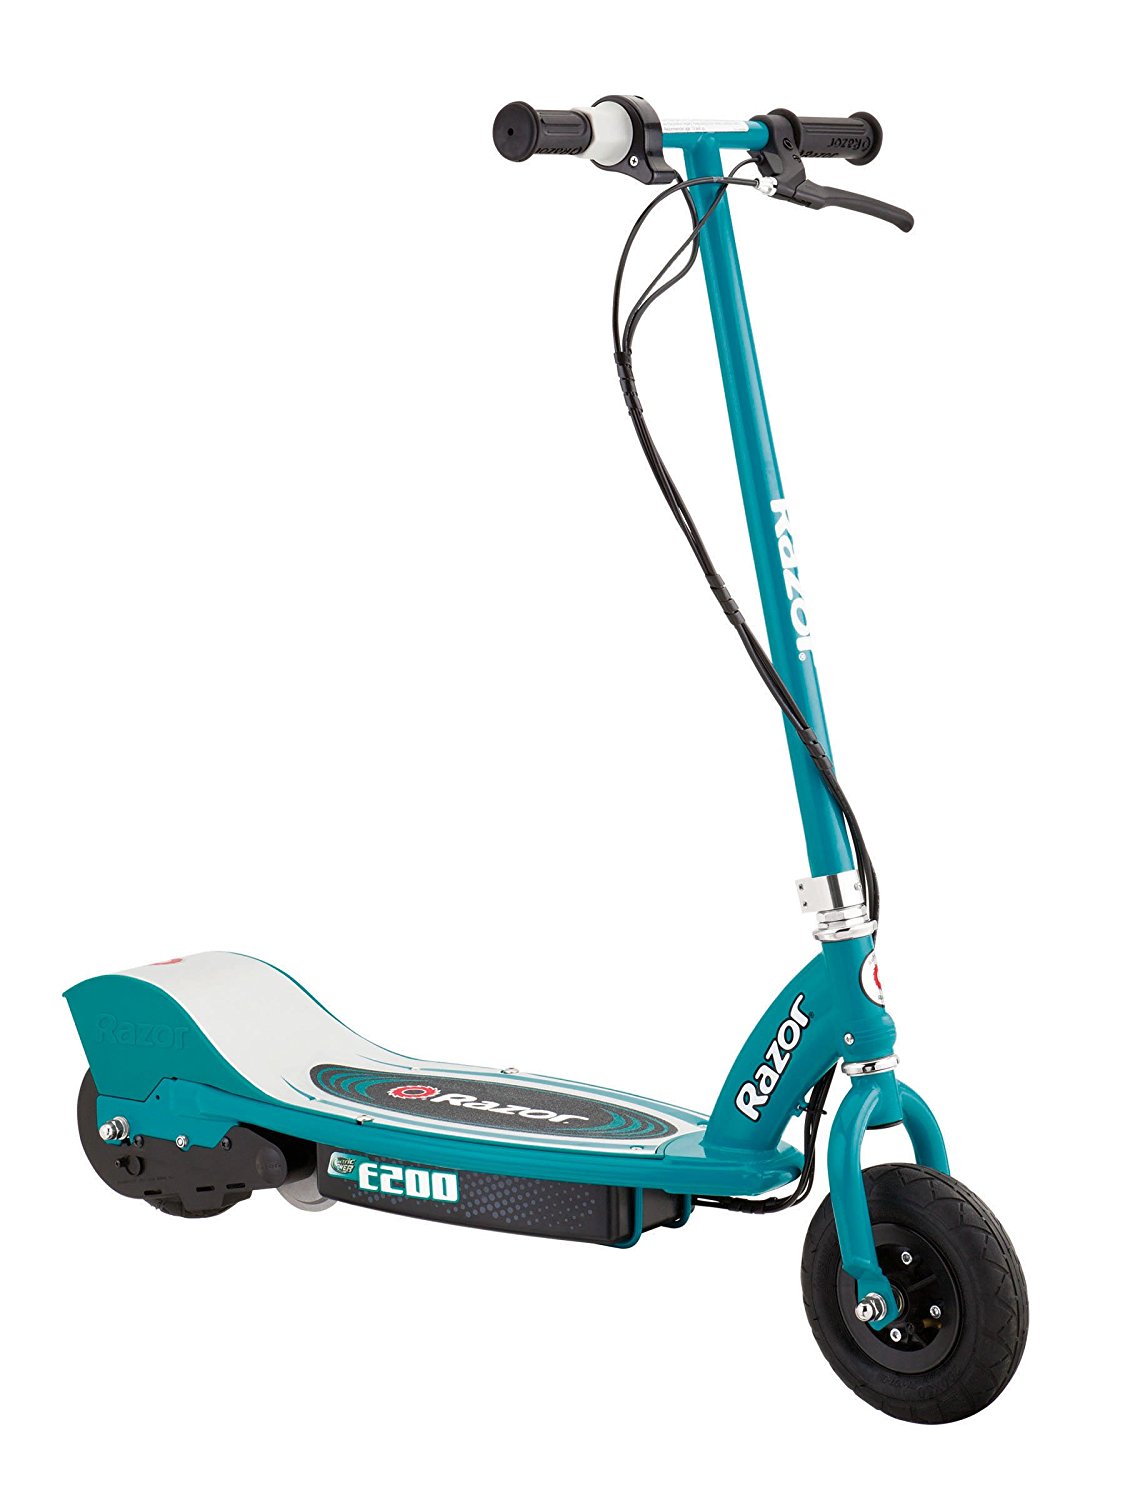 Review of Razor E200 Electric Scooter